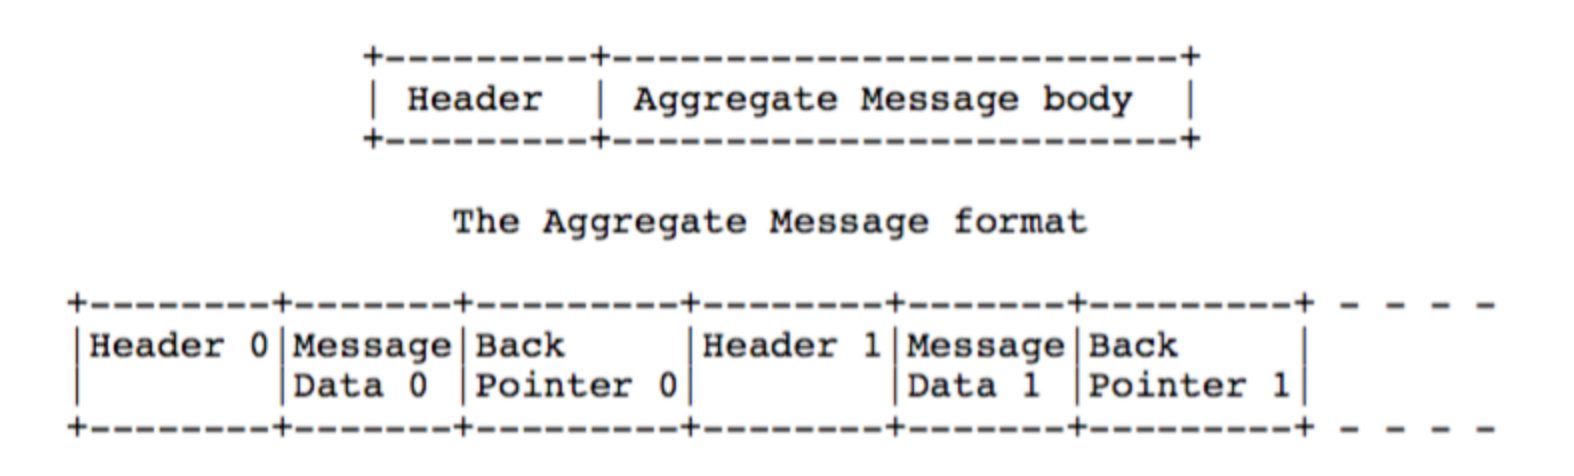 rtmp-aggregate-message